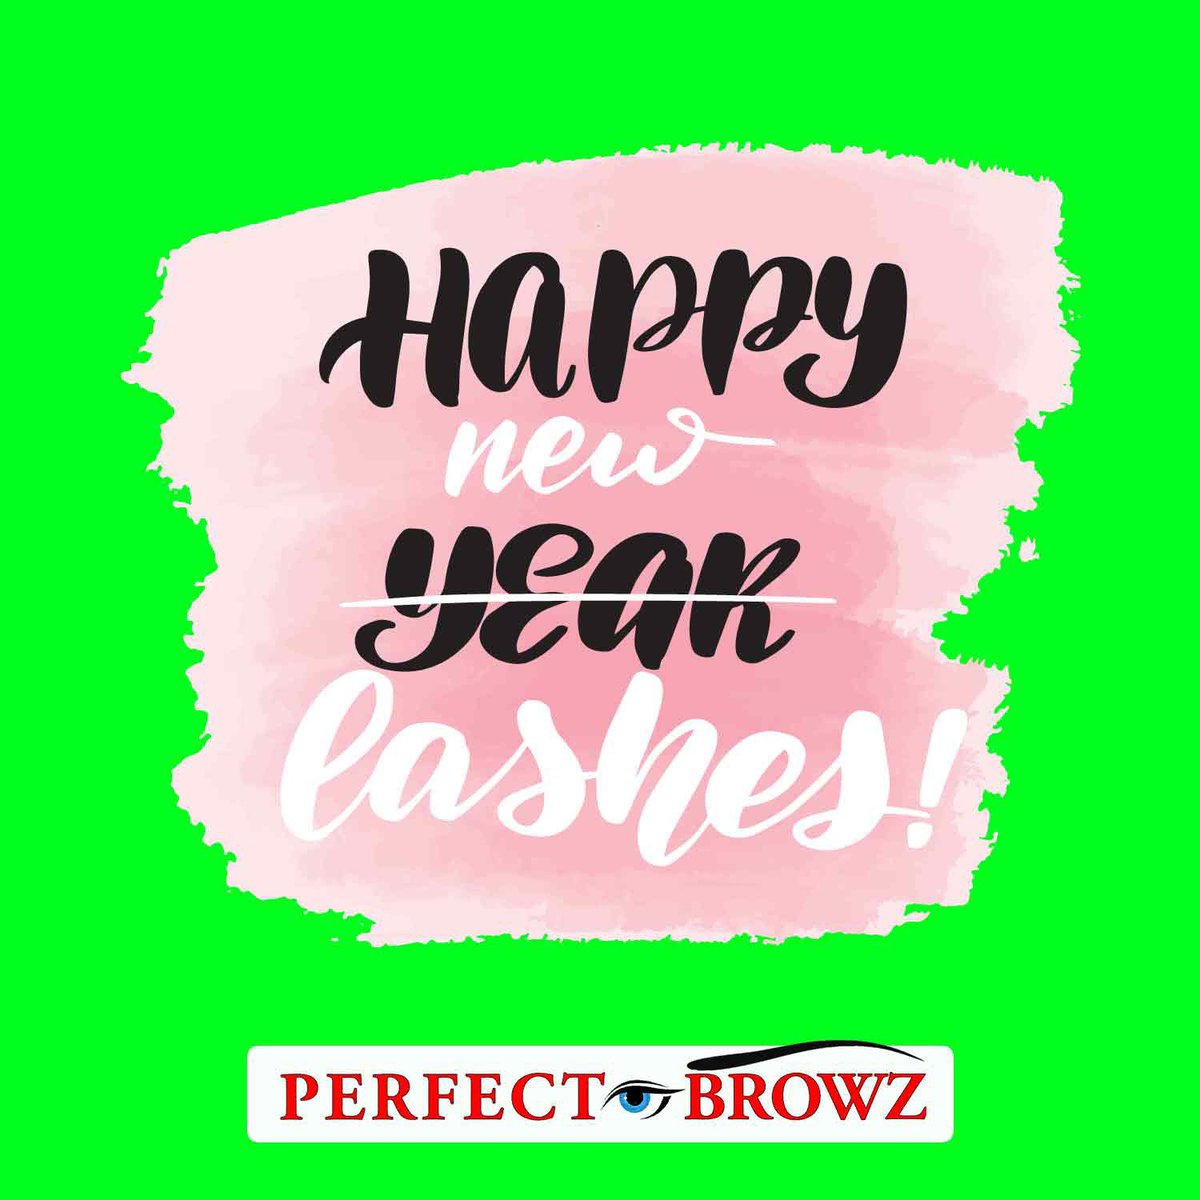 Happy New Lashes! 😍🥰😘 #NewYearNewYou2024 Stop into #PerfectBrowz for big beautiful #Lashes! And perfectly shaped #Eyebrows! ~ #JanuarySpecial 👉 Combo: Get Eyebrow Threading + Eyebrow Tinting + Eyelash Extensions for ONLY $60! *Must Mention to Redeem. Cannot be combined. ❤️💚